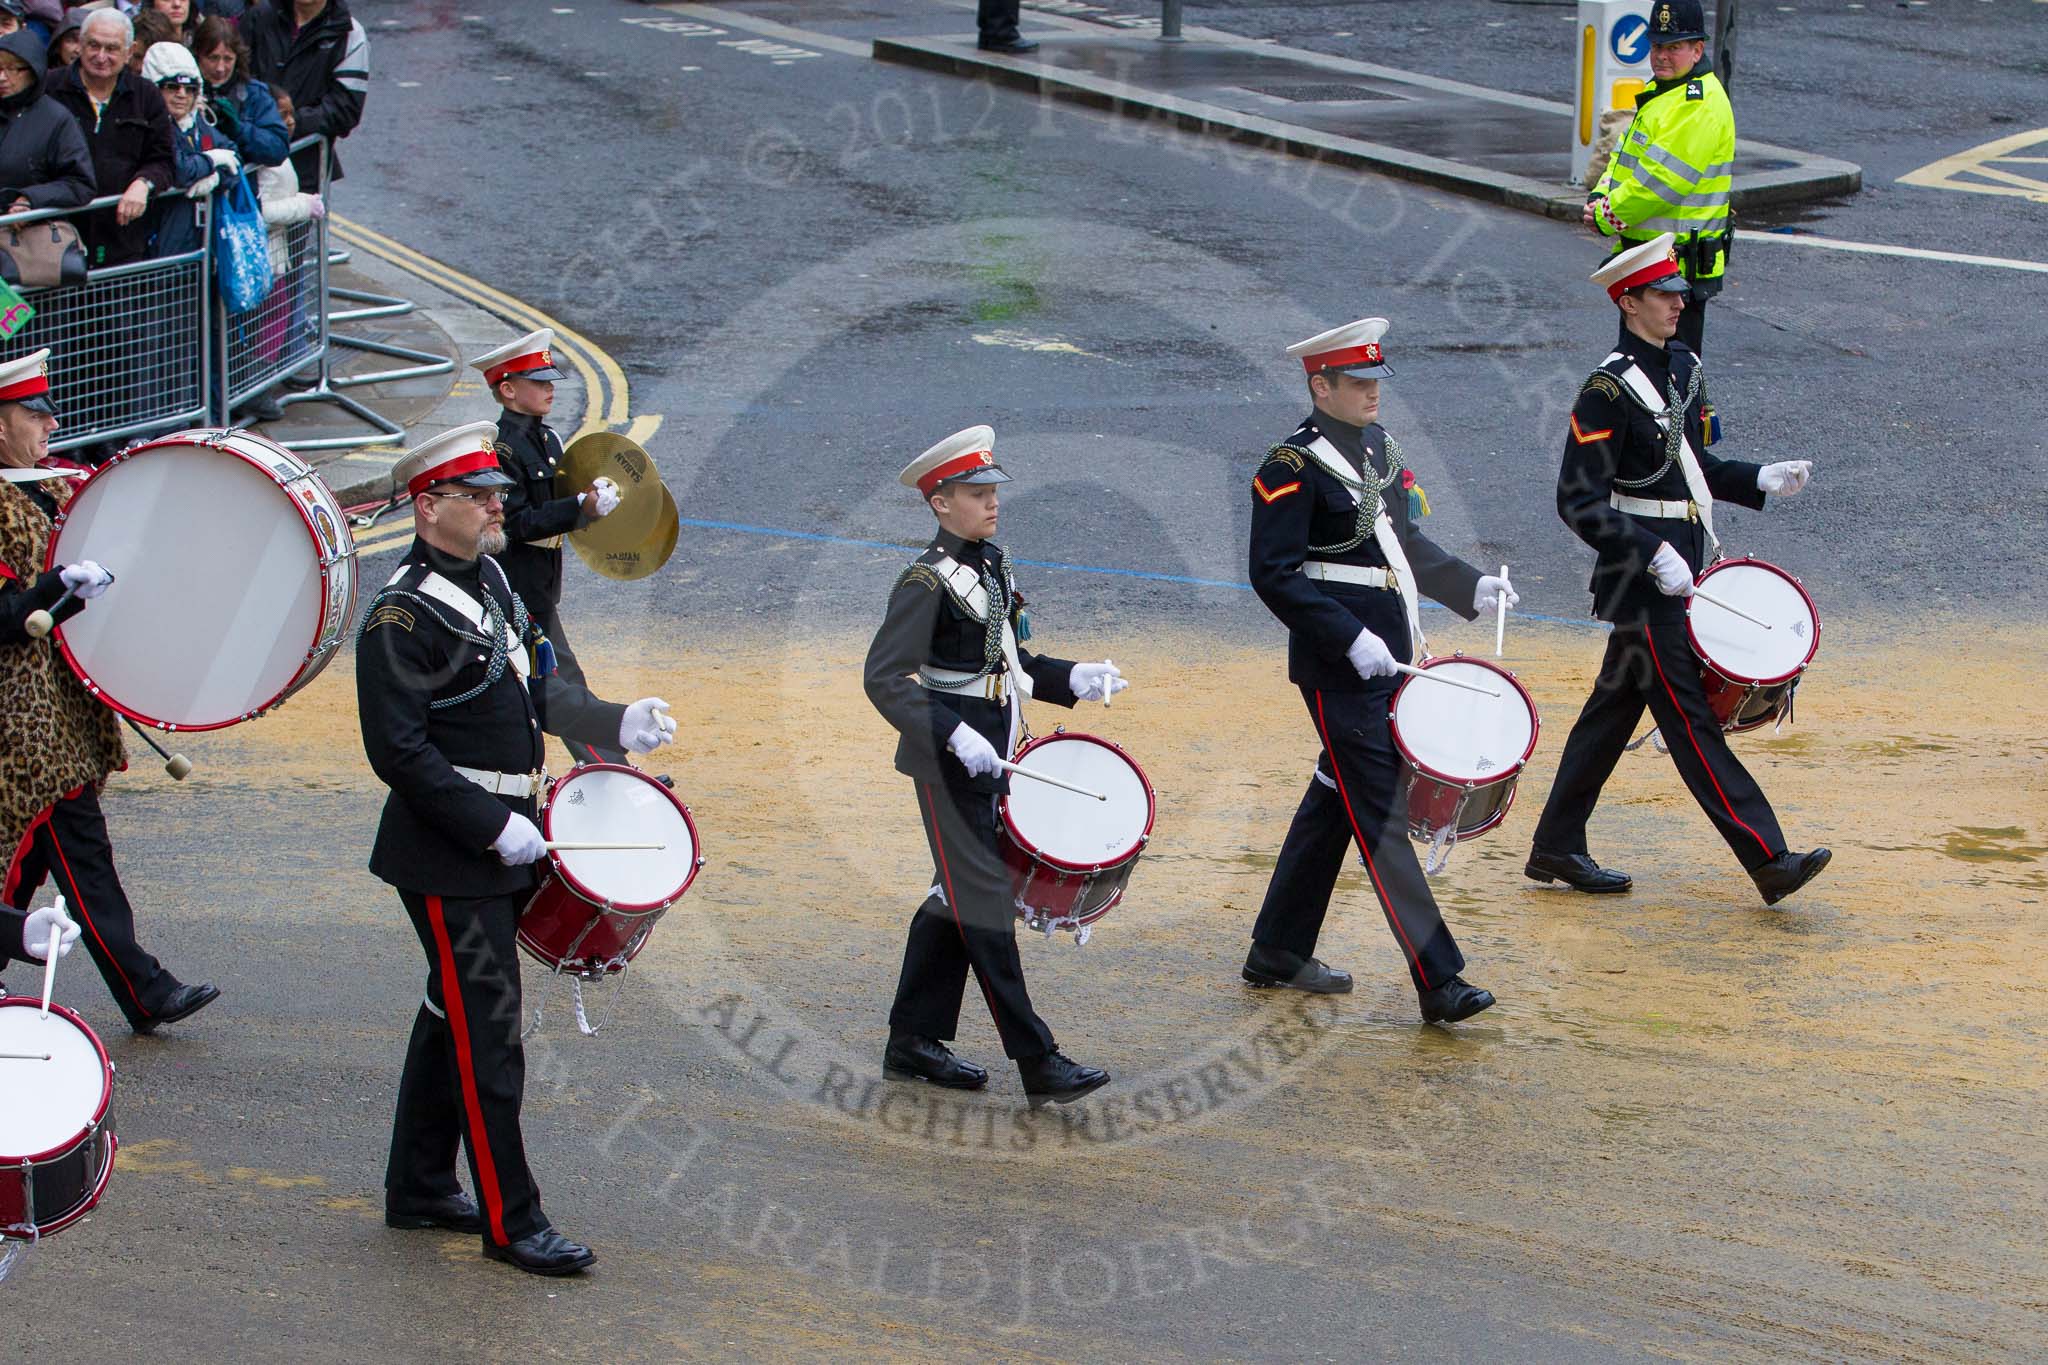 Lord Mayor's Show 2012: Entry 111 - Surbiton Royal British Legion Band..
Press stand opposite Mansion House, City of London,
London,
Greater London,
United Kingdom,
on 10 November 2012 at 11:55, image #1585